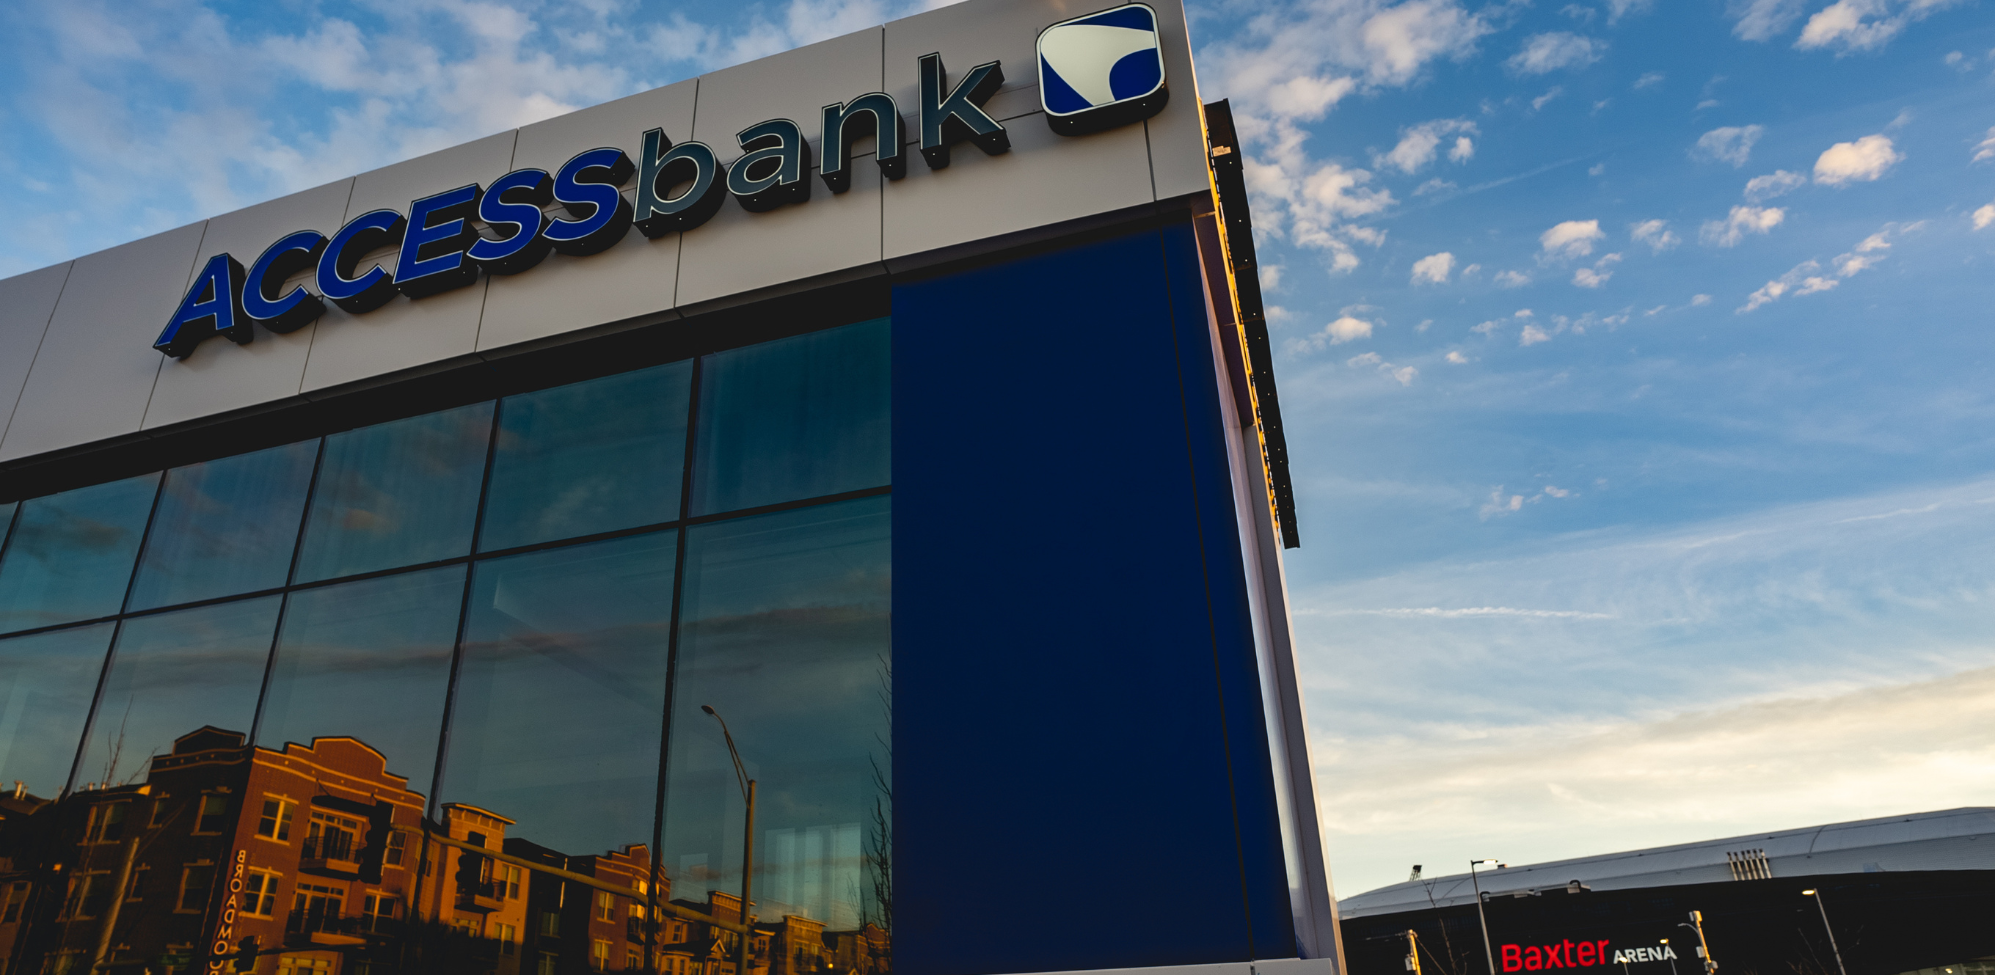 ACCESSbank written on a building outside of Baxter Arena.